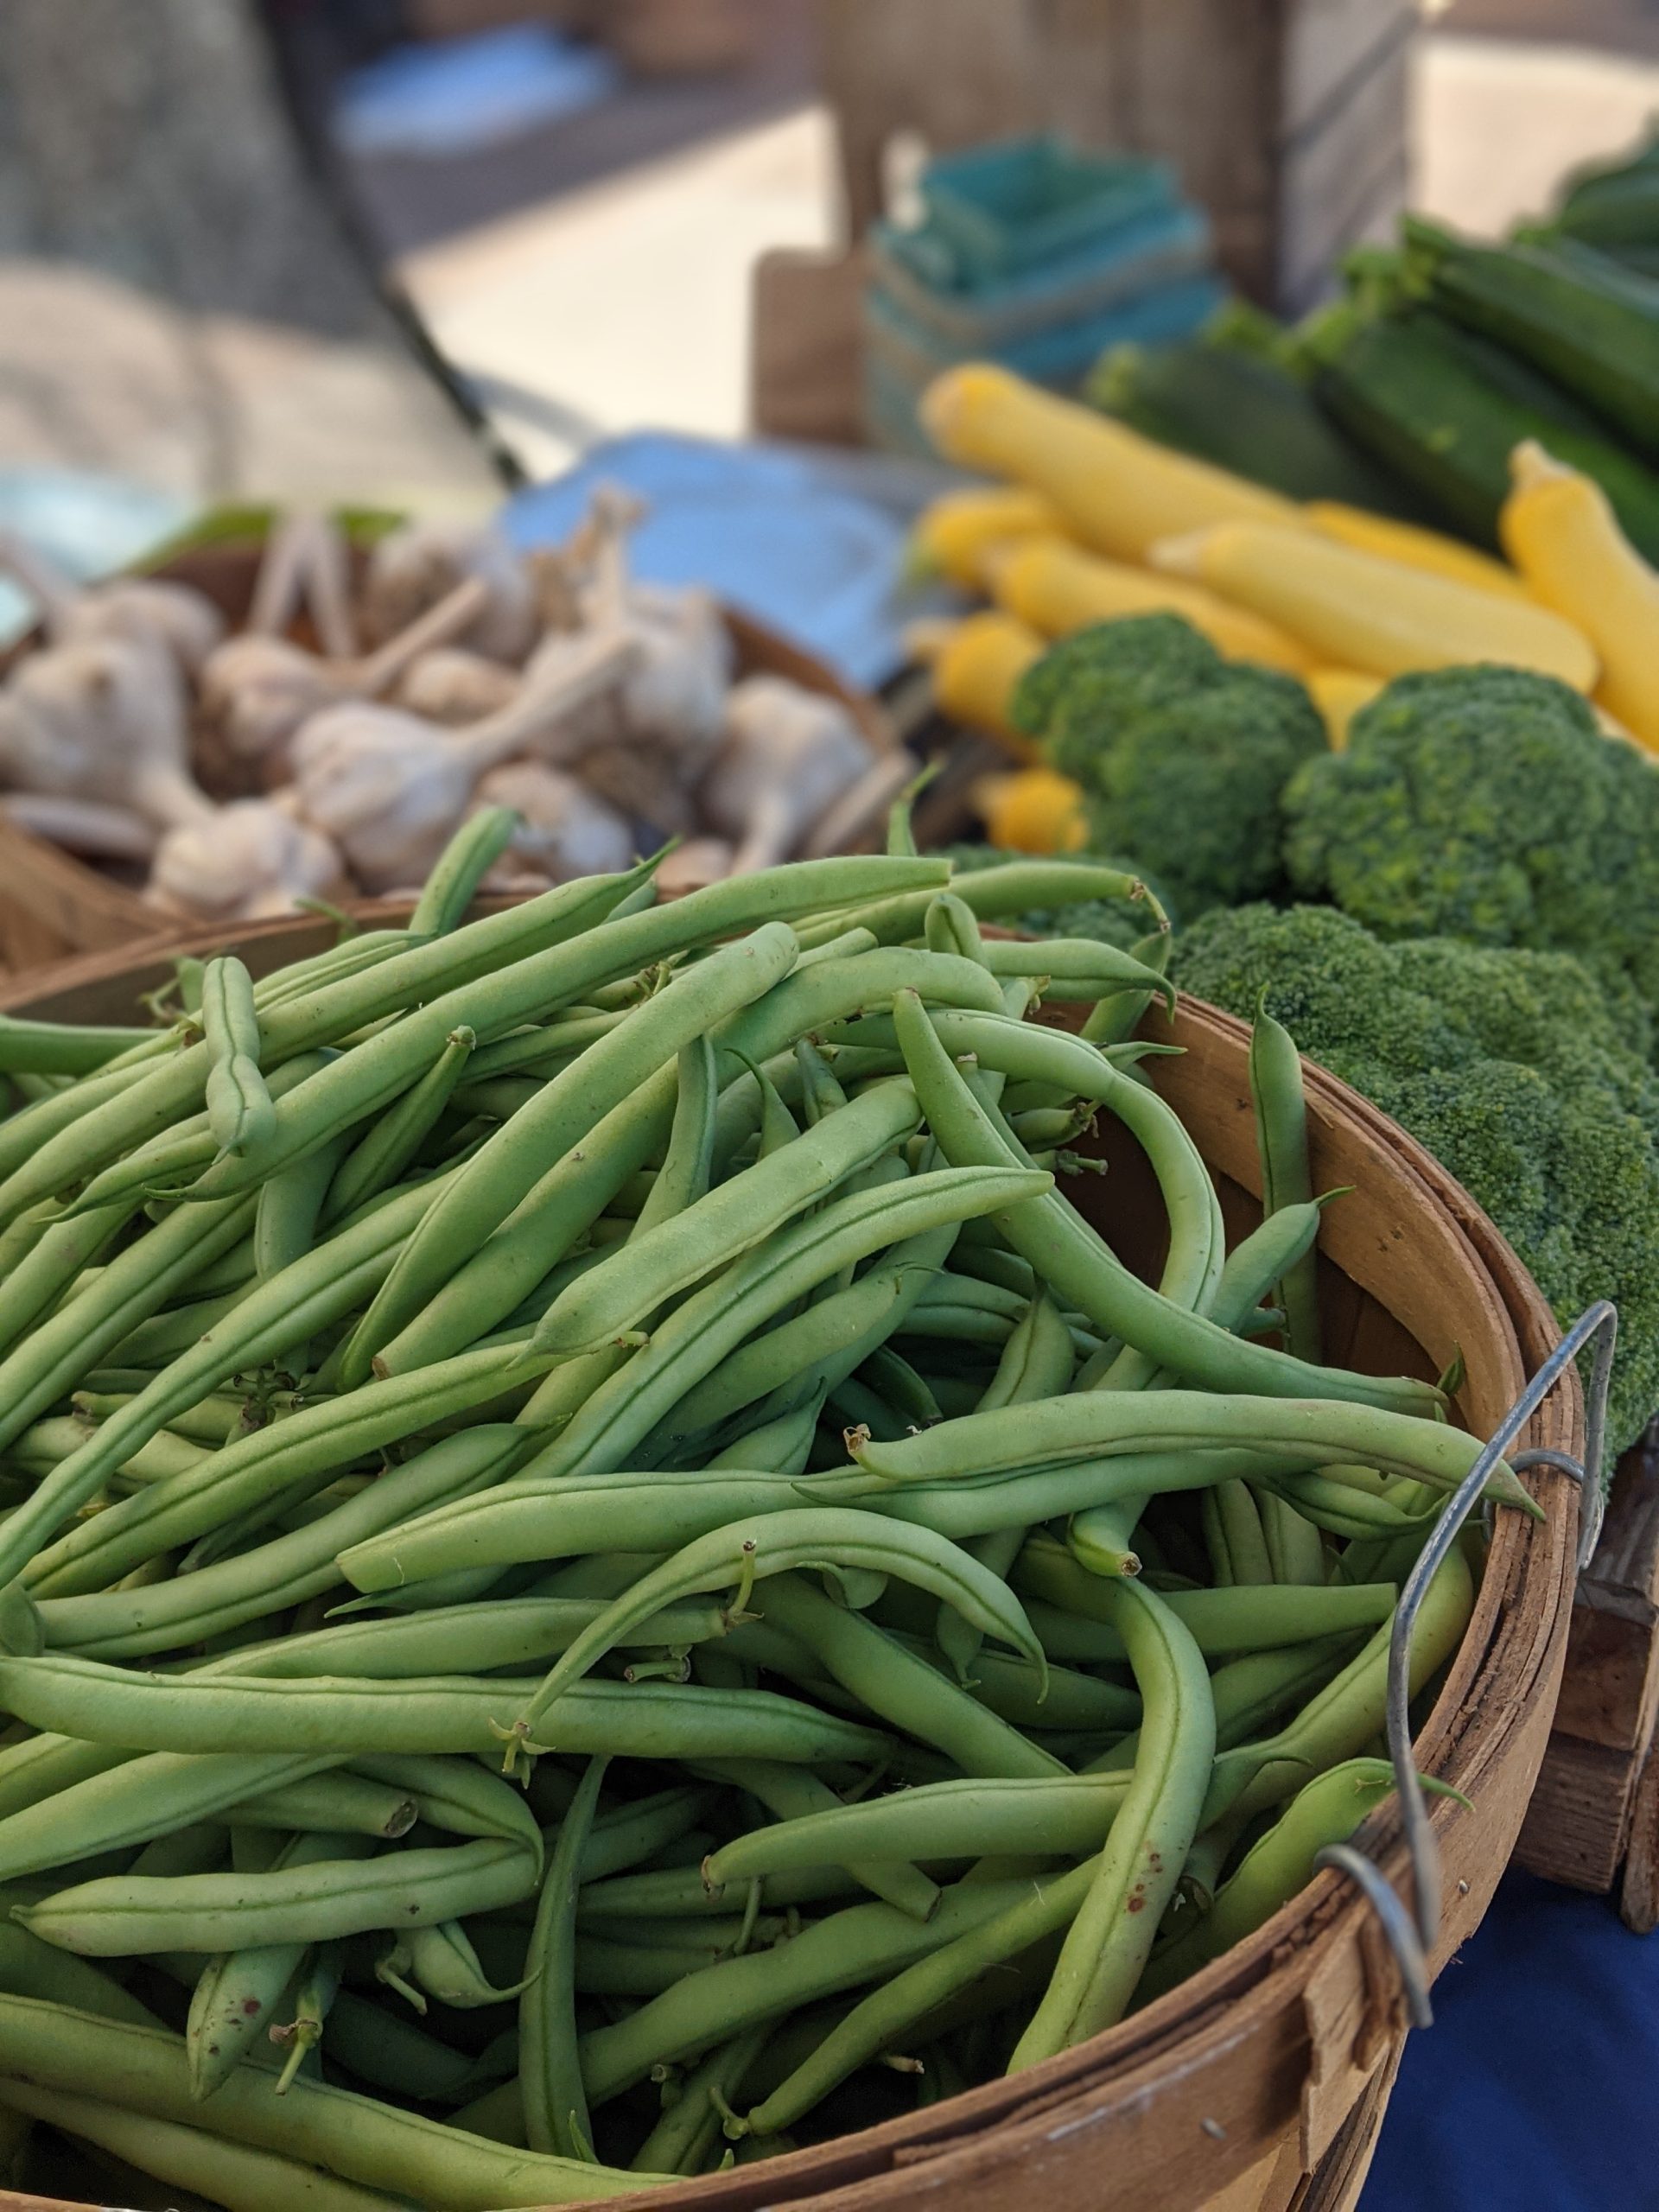 Fresh Green Beans, with broccoli, garlic, zucchini and summer squash in the background. All being sold at the farmers market.